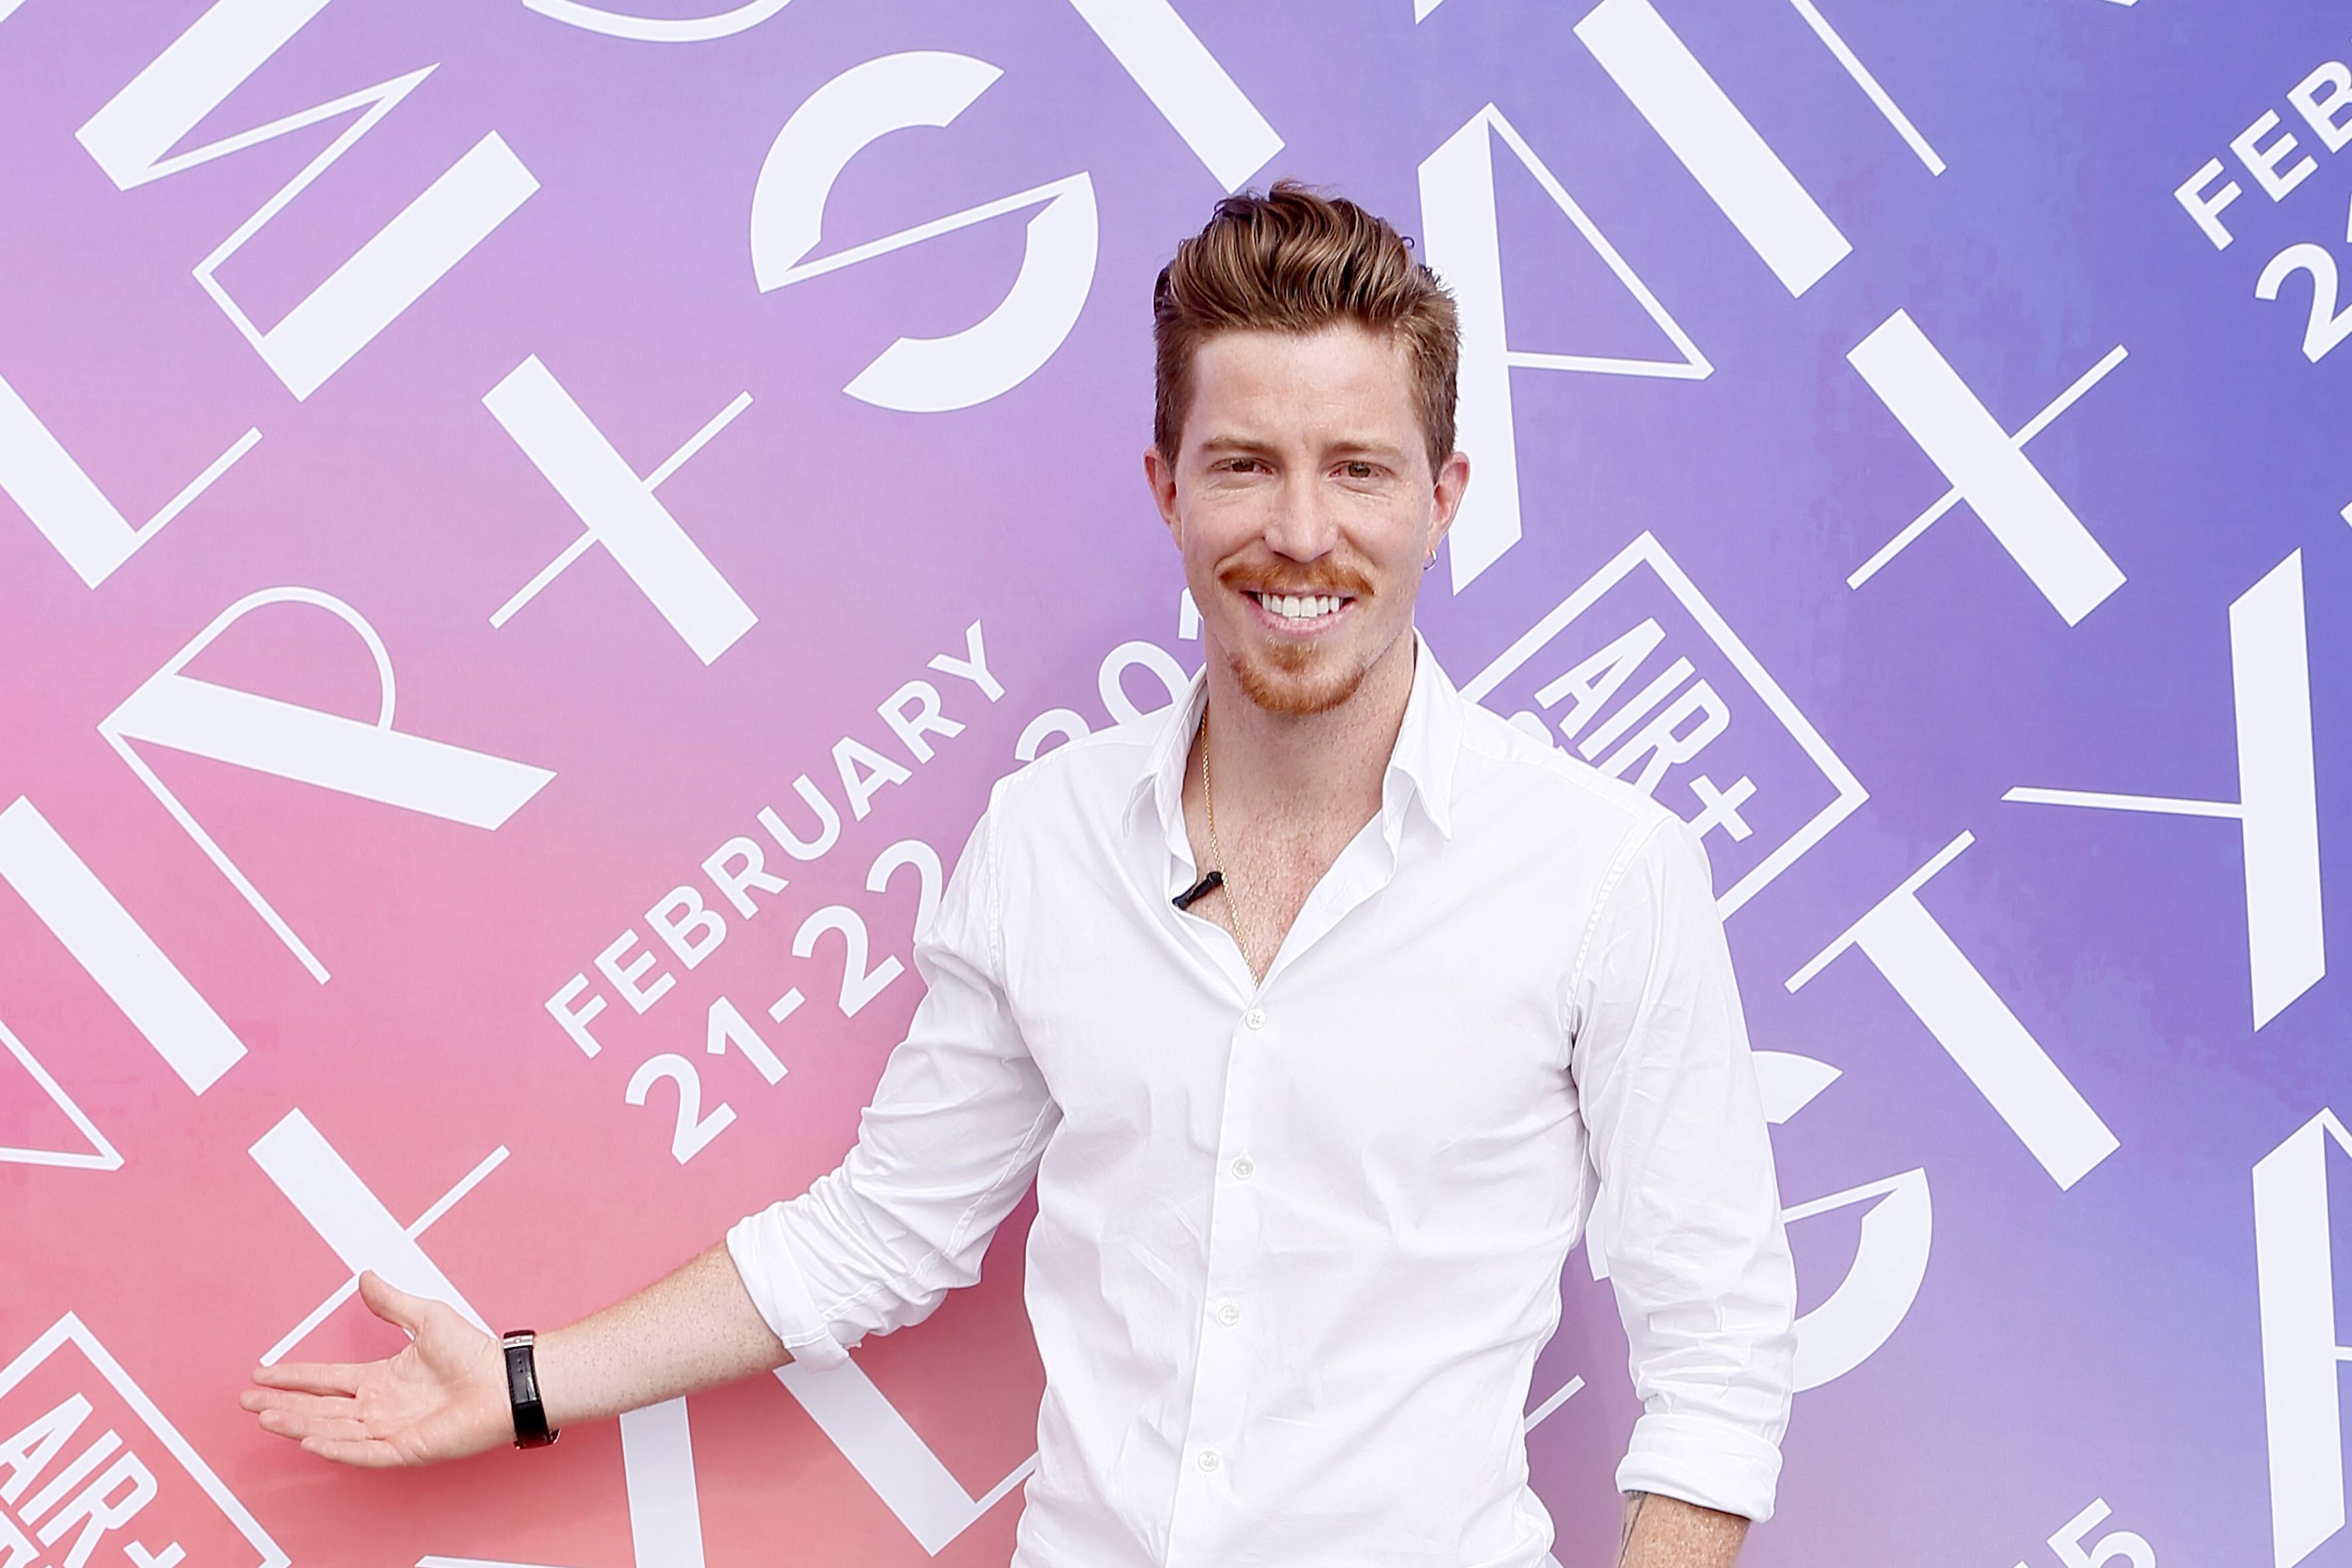 Two-time Olympic gold medalist and skateboard champion Shaun White